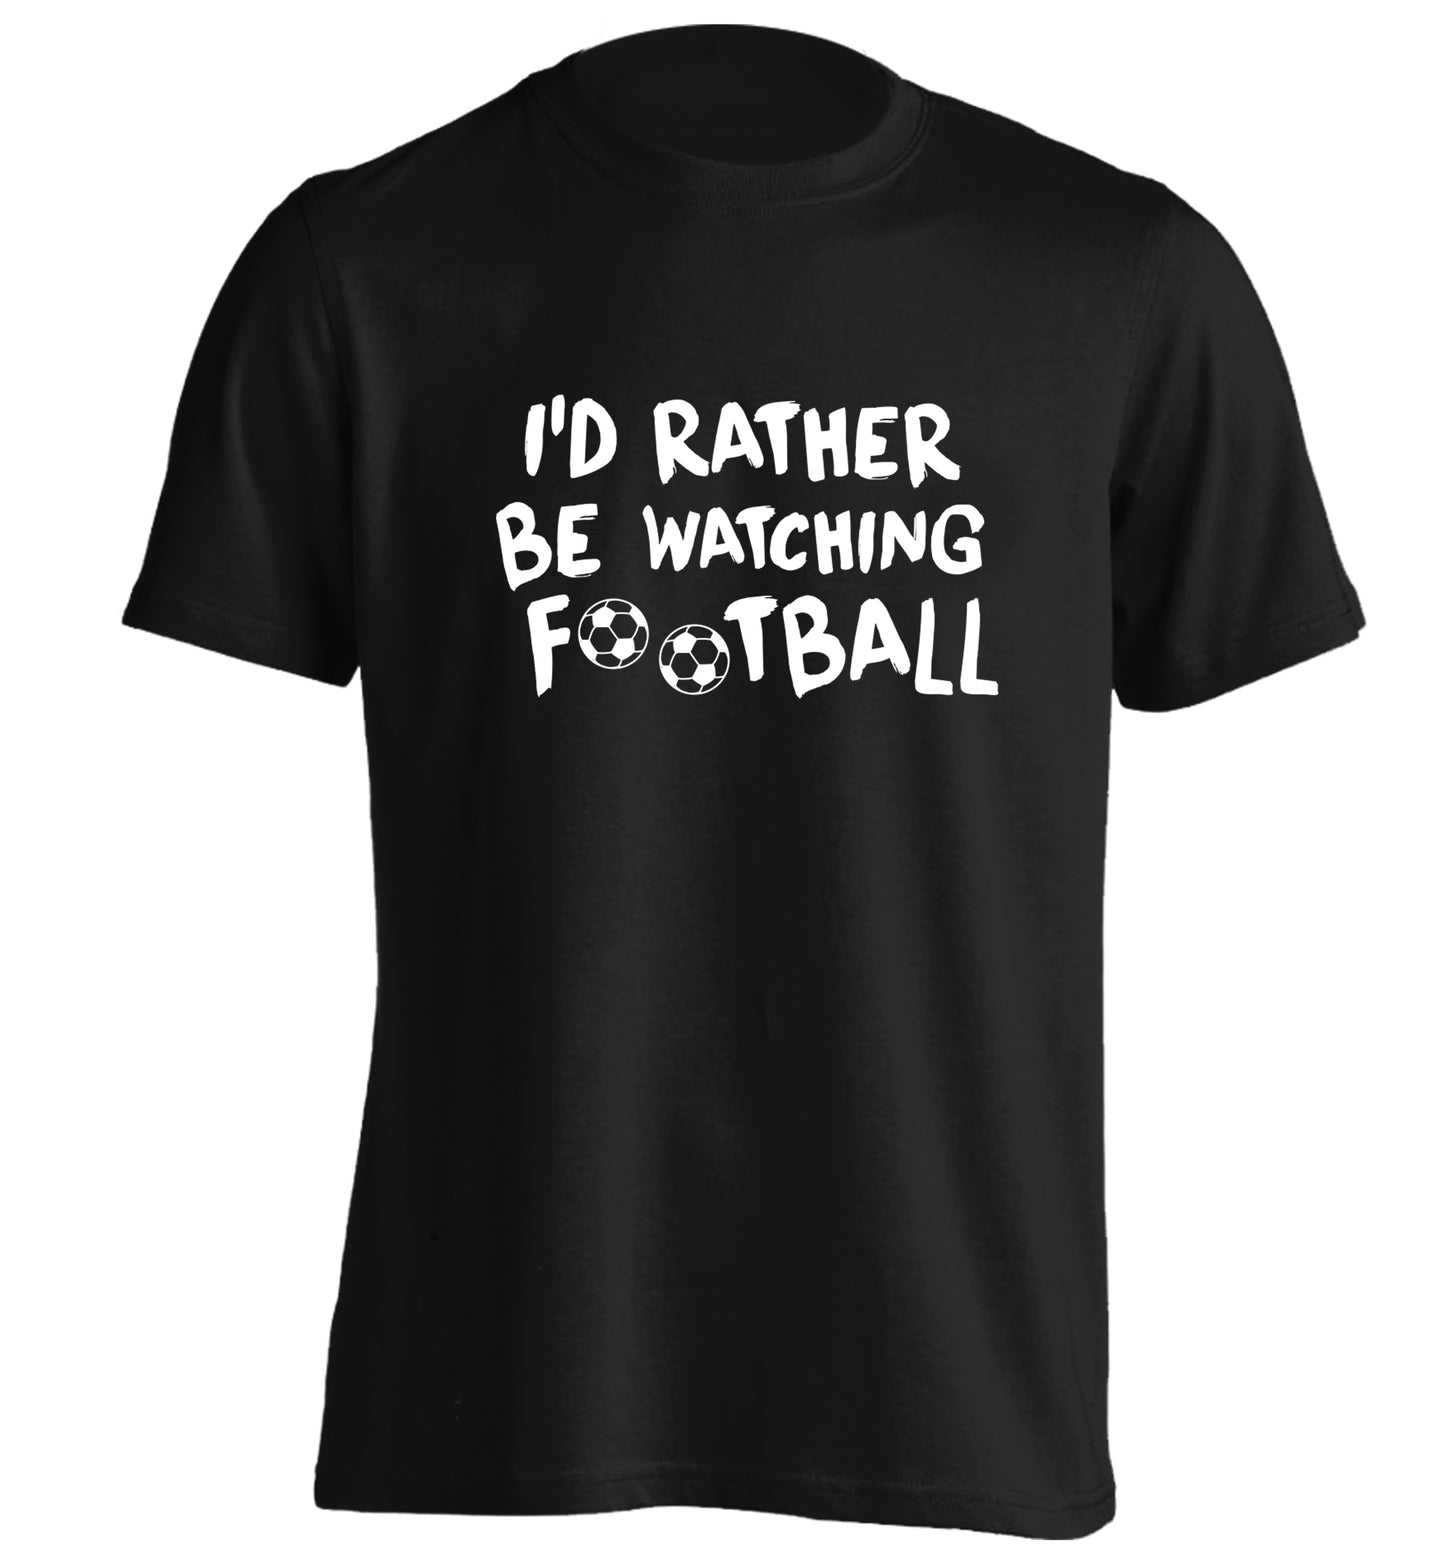 I'd rather be watching football adults unisexblack Tshirt 2XL